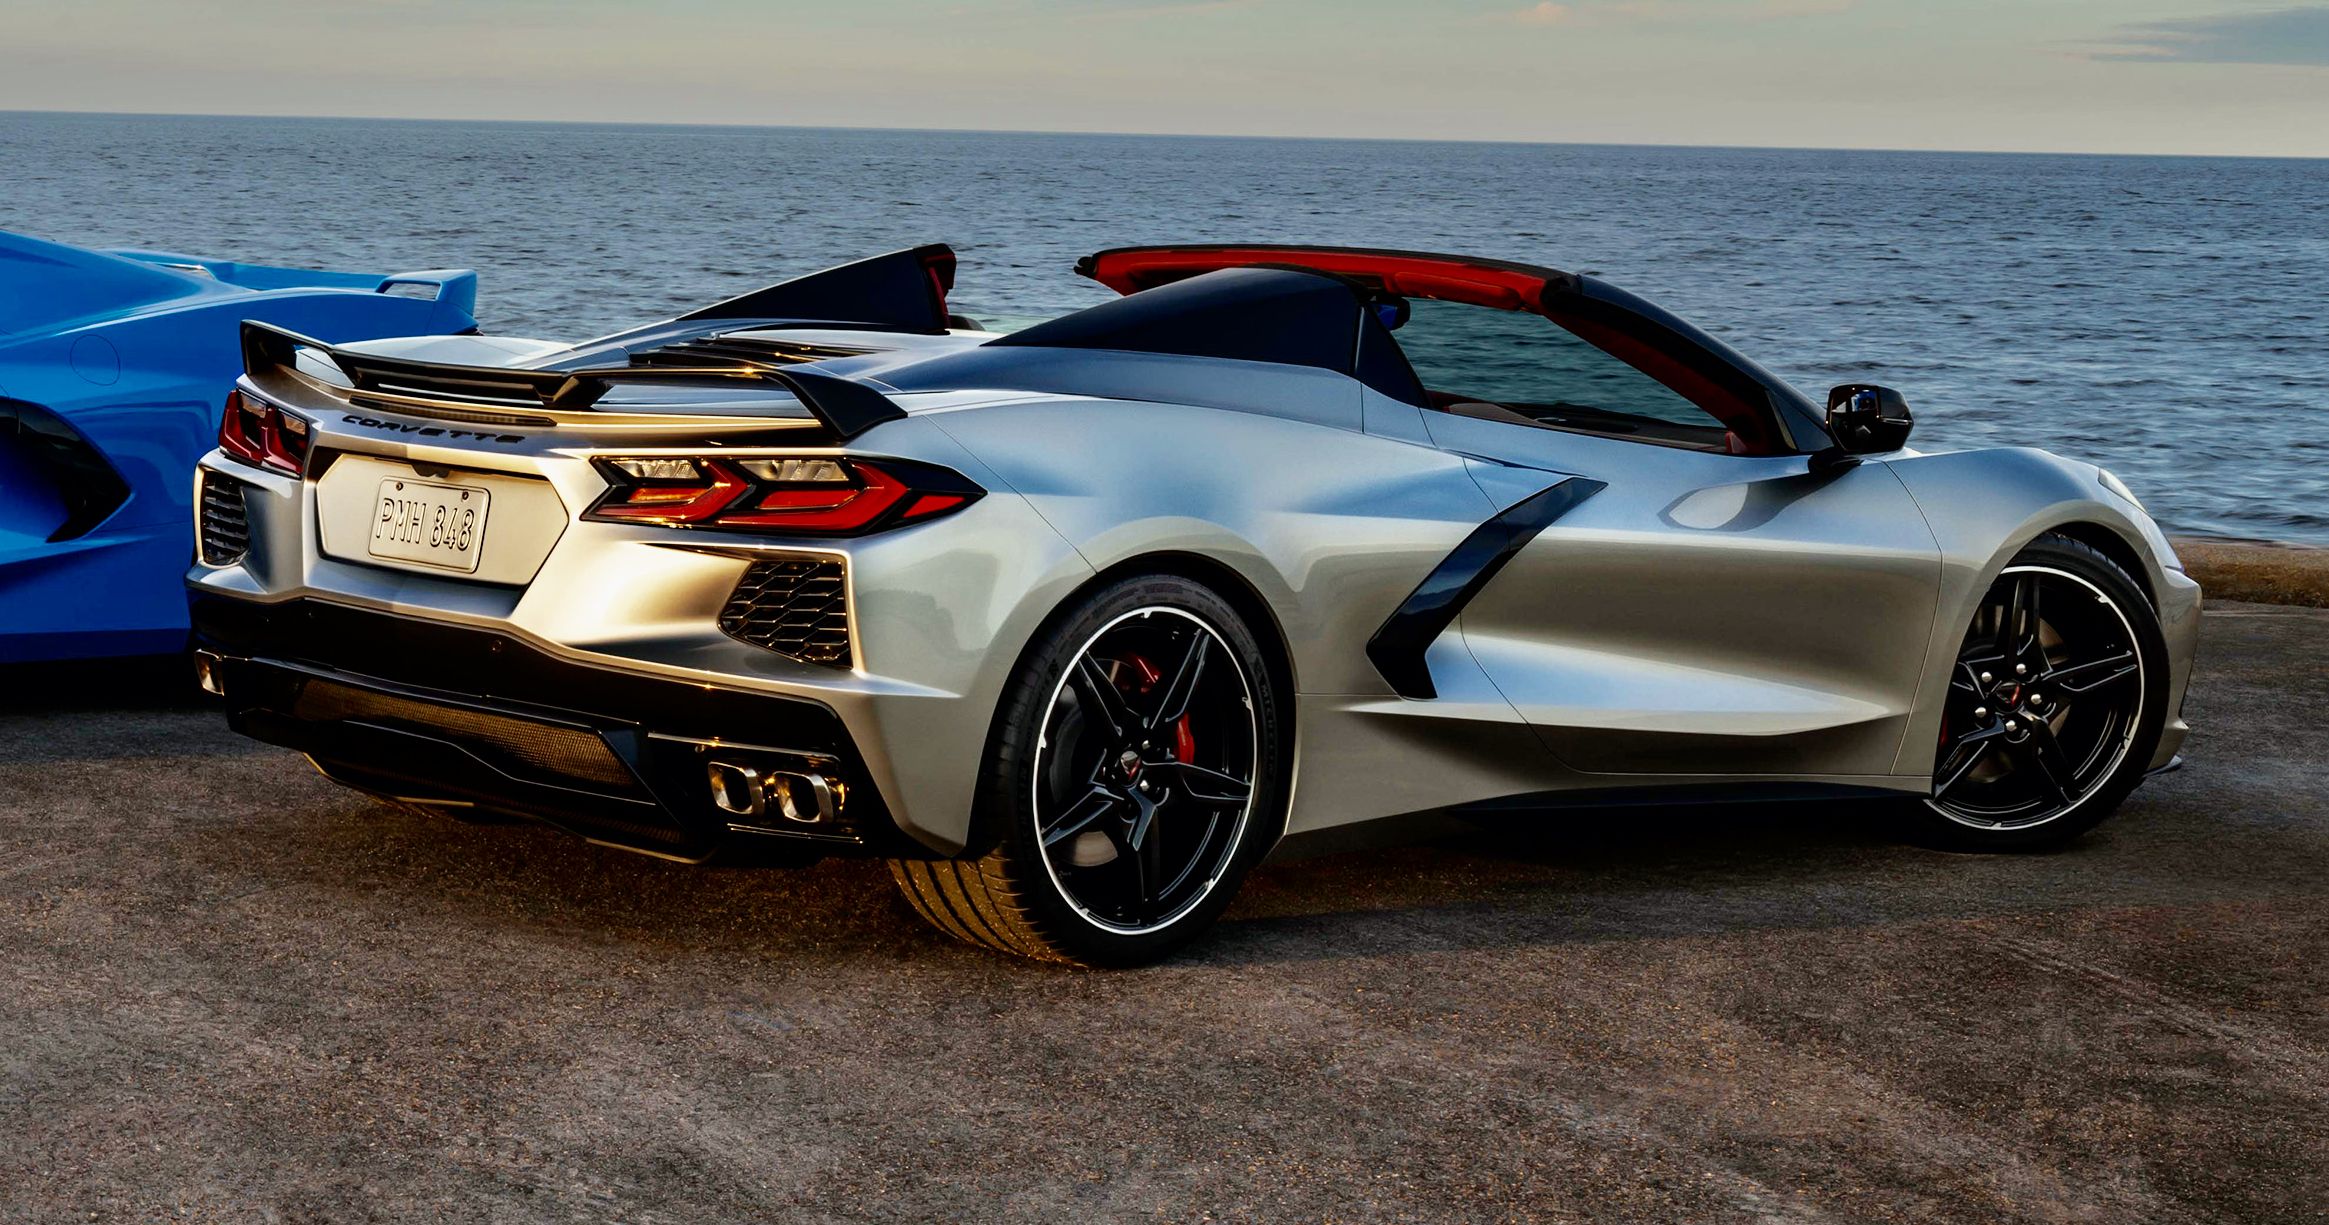 A 2021 Chevrolet Corvette C8 with stripes stands parked near the ocean.